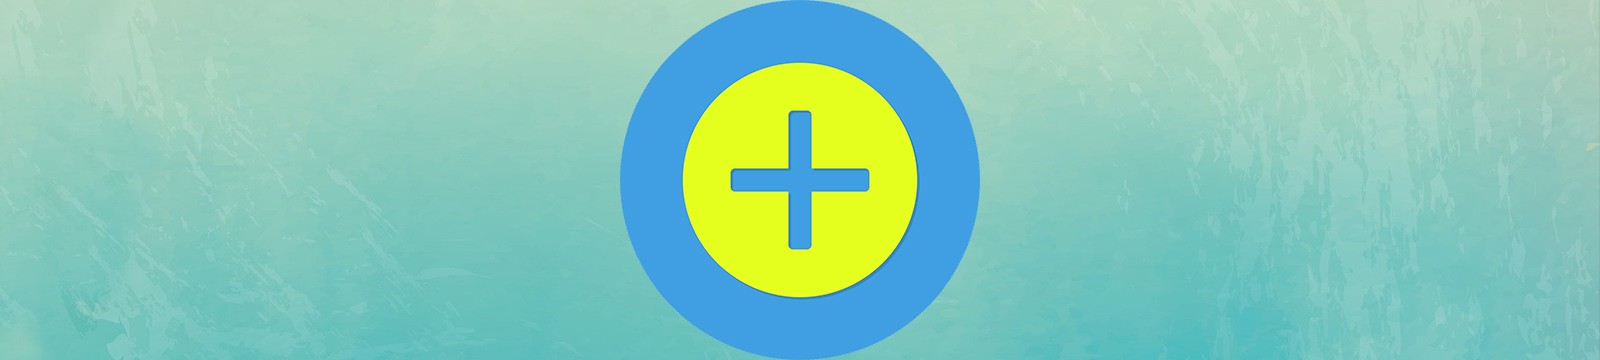 Image of a blue circle with a yellow center. In the middle of the circle is a blue plus symbol. 